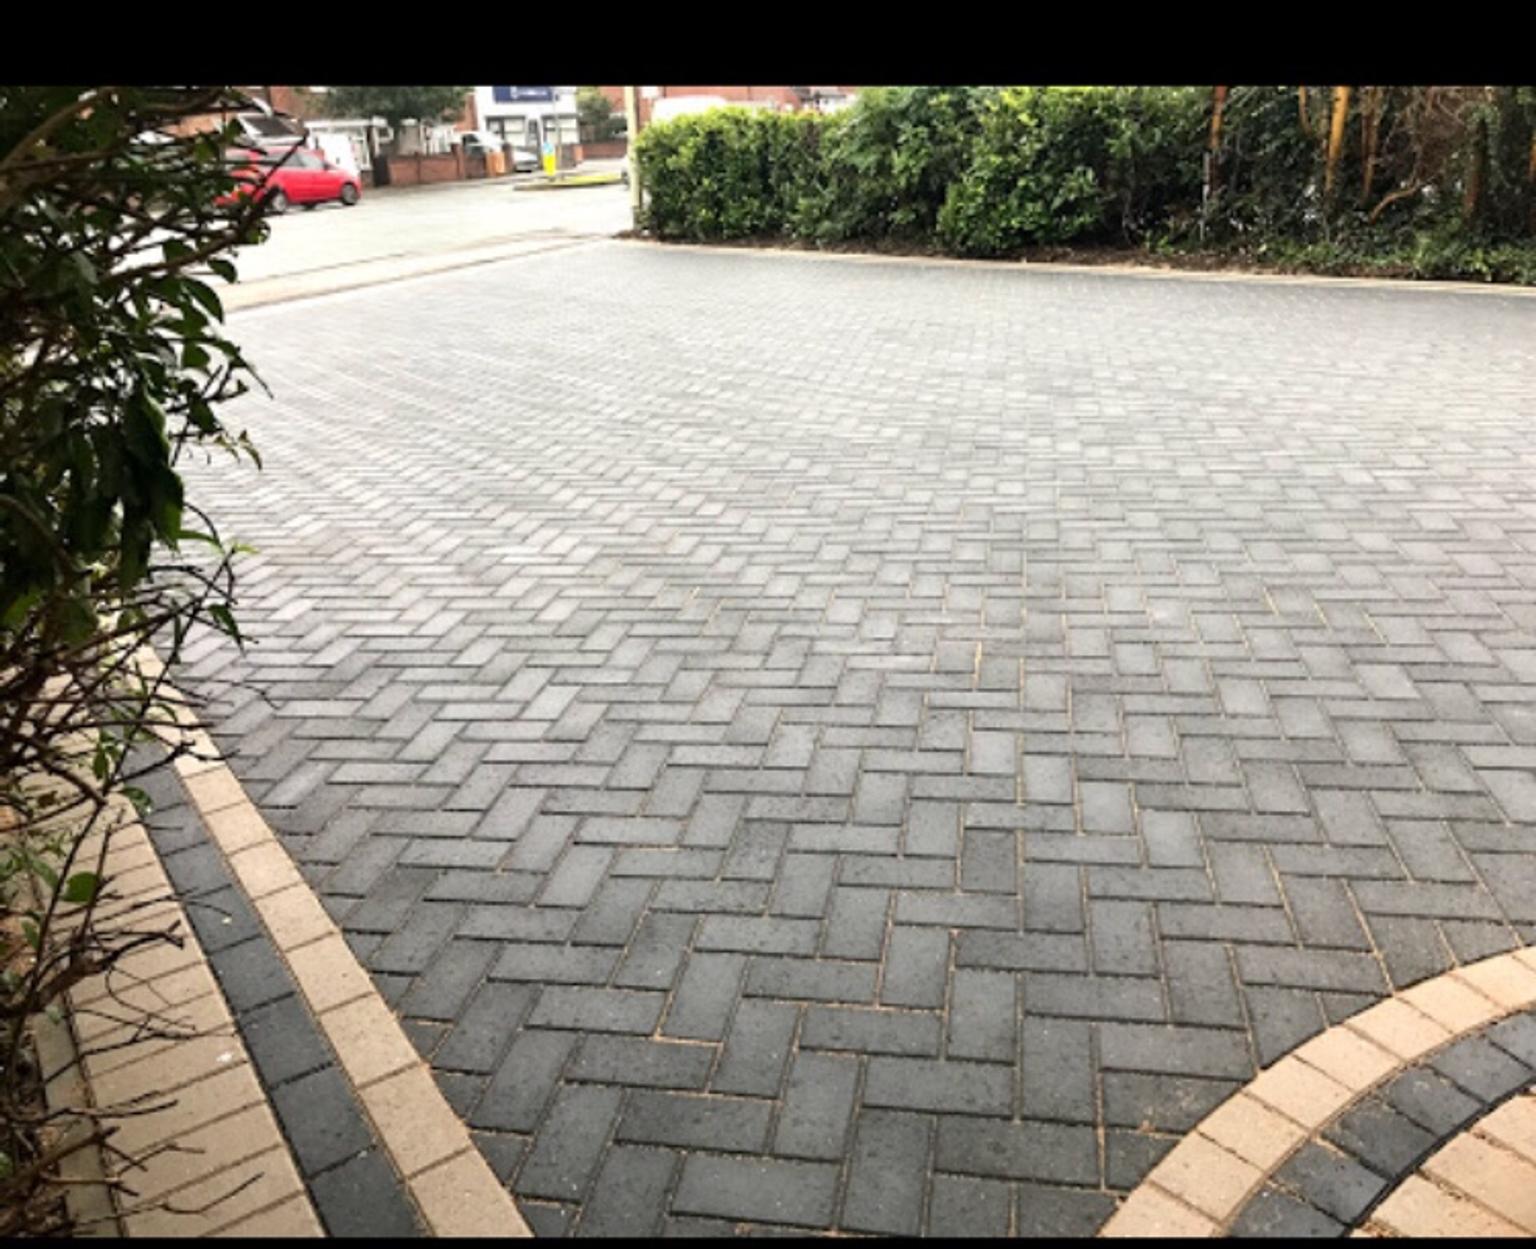 Propave Uk Free Quotes Driveways Services In Le5 Leicester For 35 00 For Sale Shpock